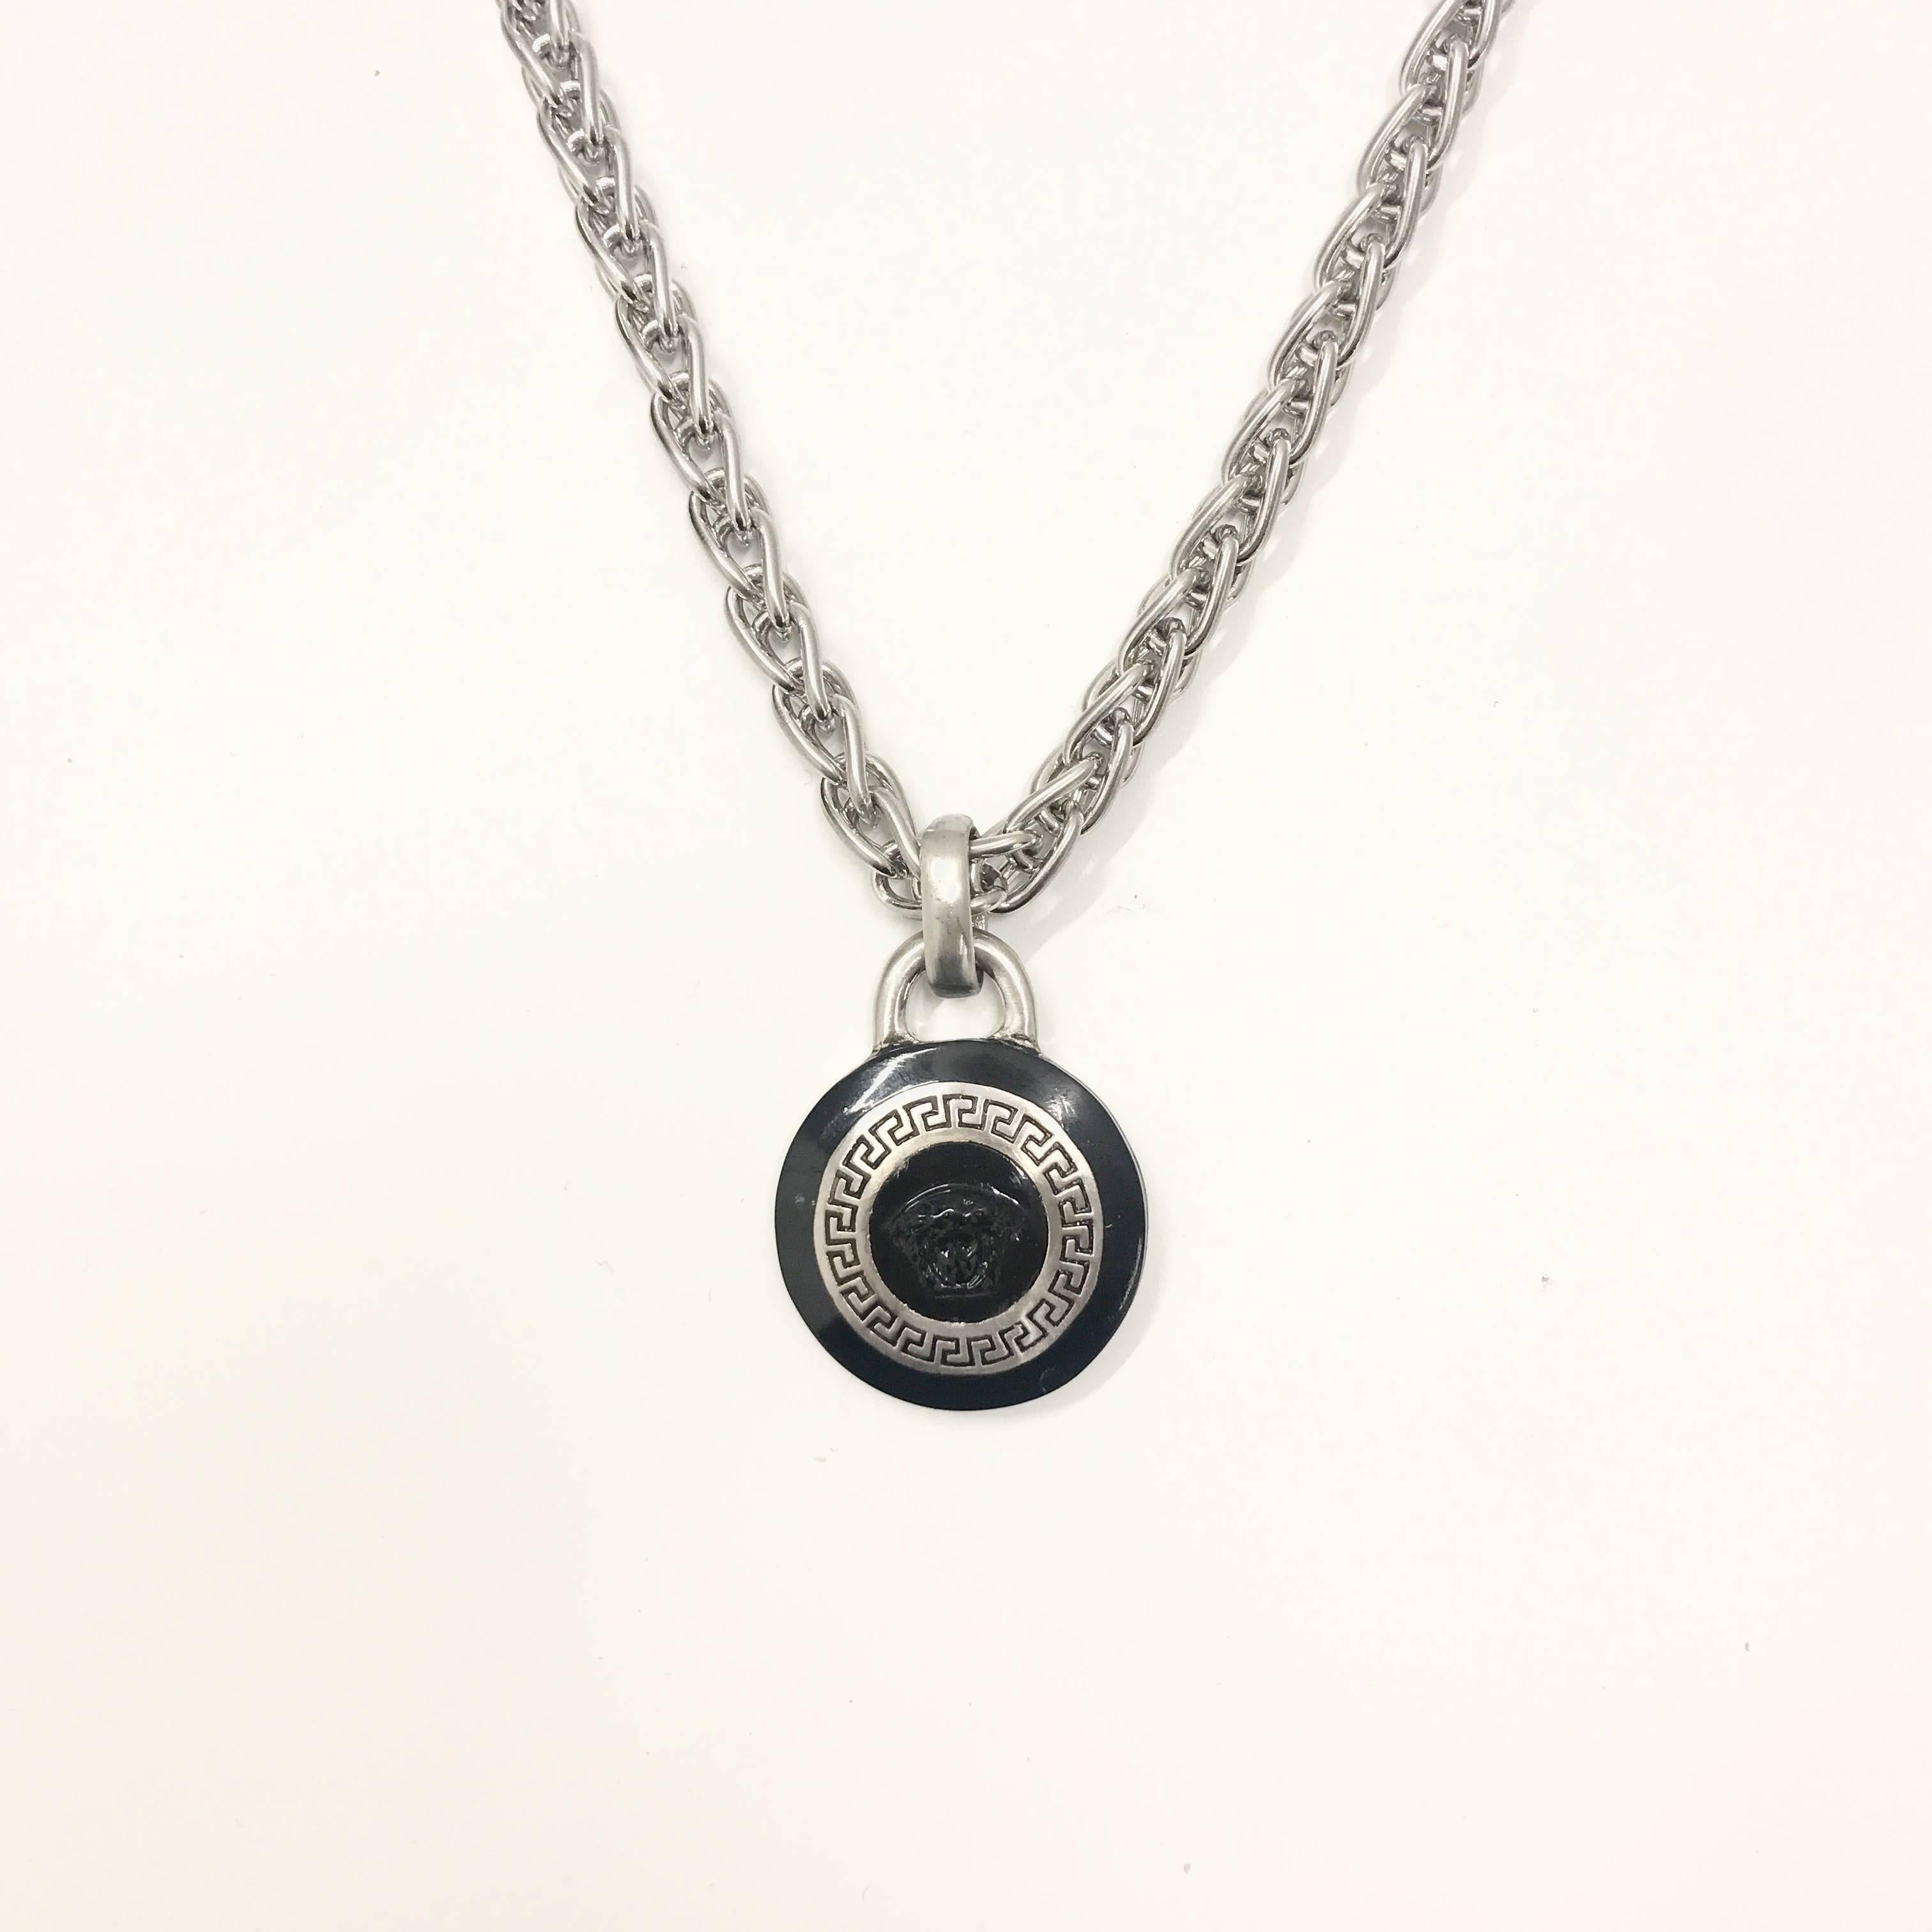 A staple of classic Versace design, this medallion contains both emblematic motifs of the medusa head and a brushed silver mosaic on a black enamel base, keeping this item simple yet effective. The multi faceted link chain adds great definition and